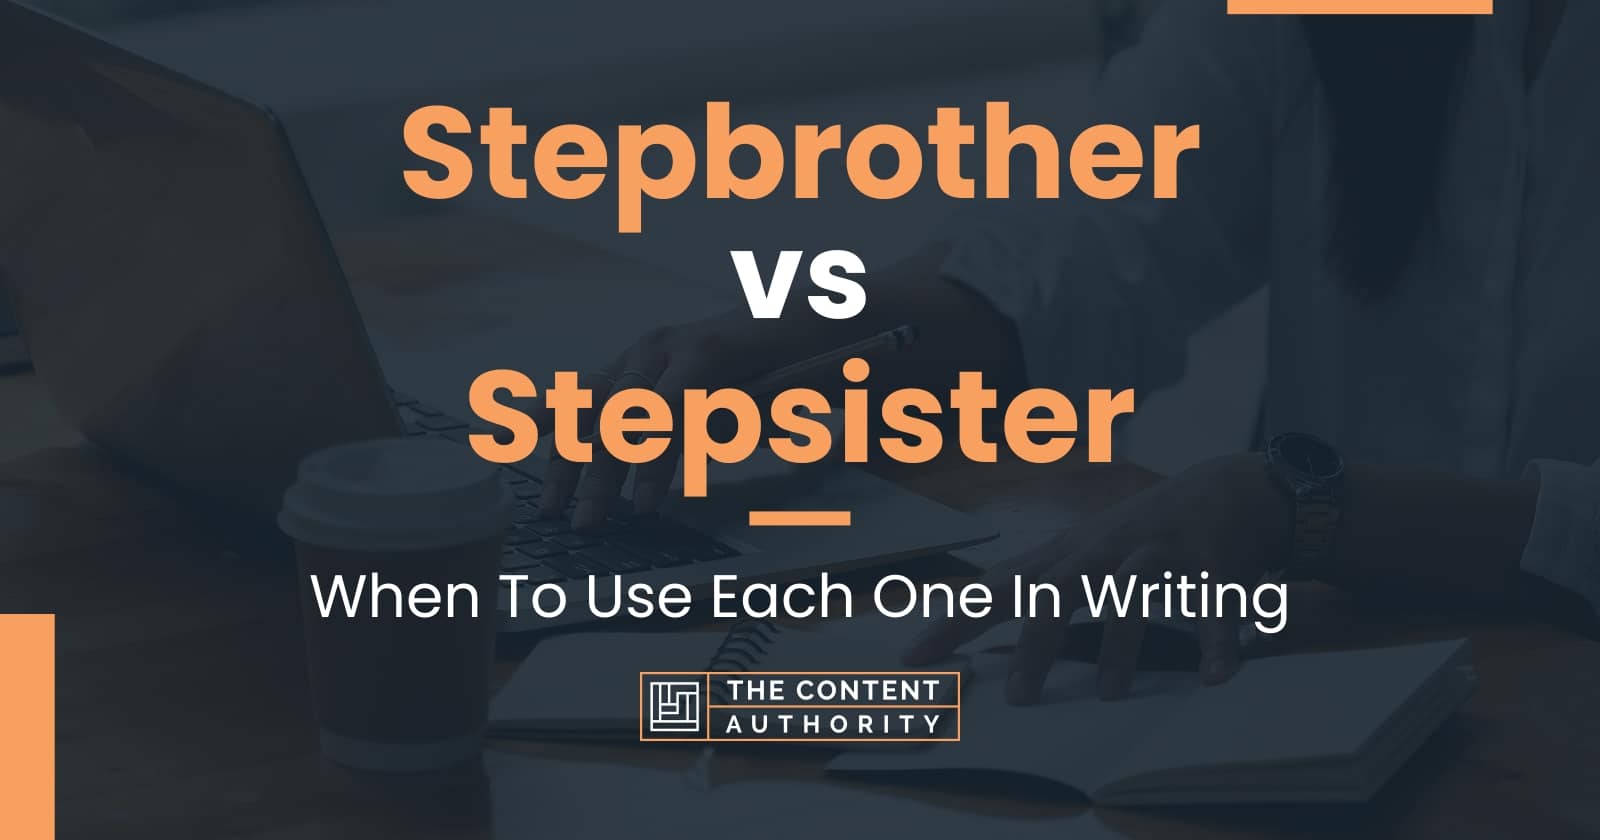 chris zaldua recommends Stepbrother And Stepsister